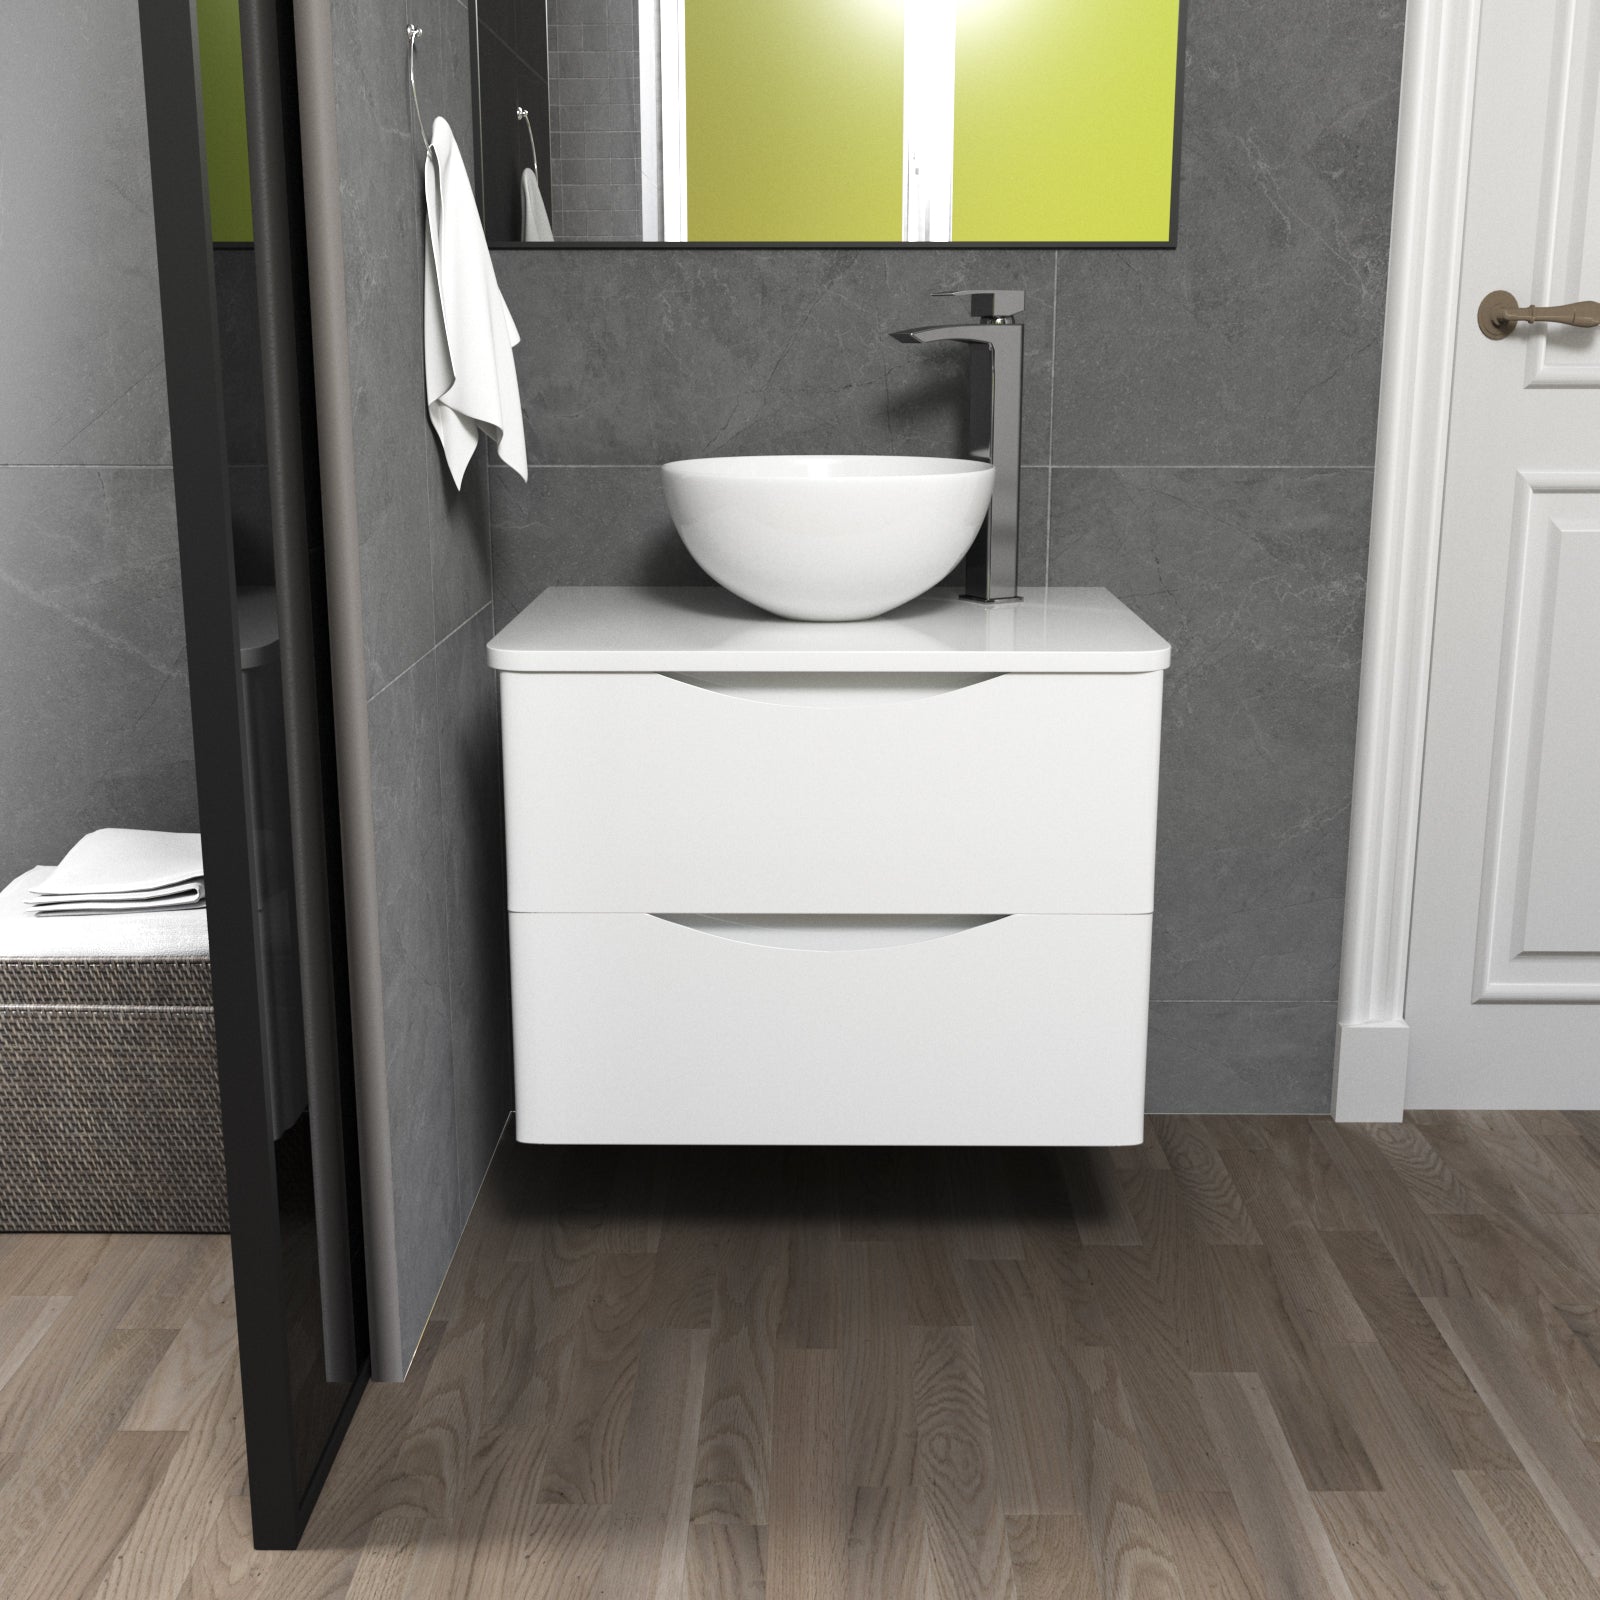 Merton White 600mm Bathroom Wall Hung Vanity Unit With Round Ceramic Countertop 320mm Basin